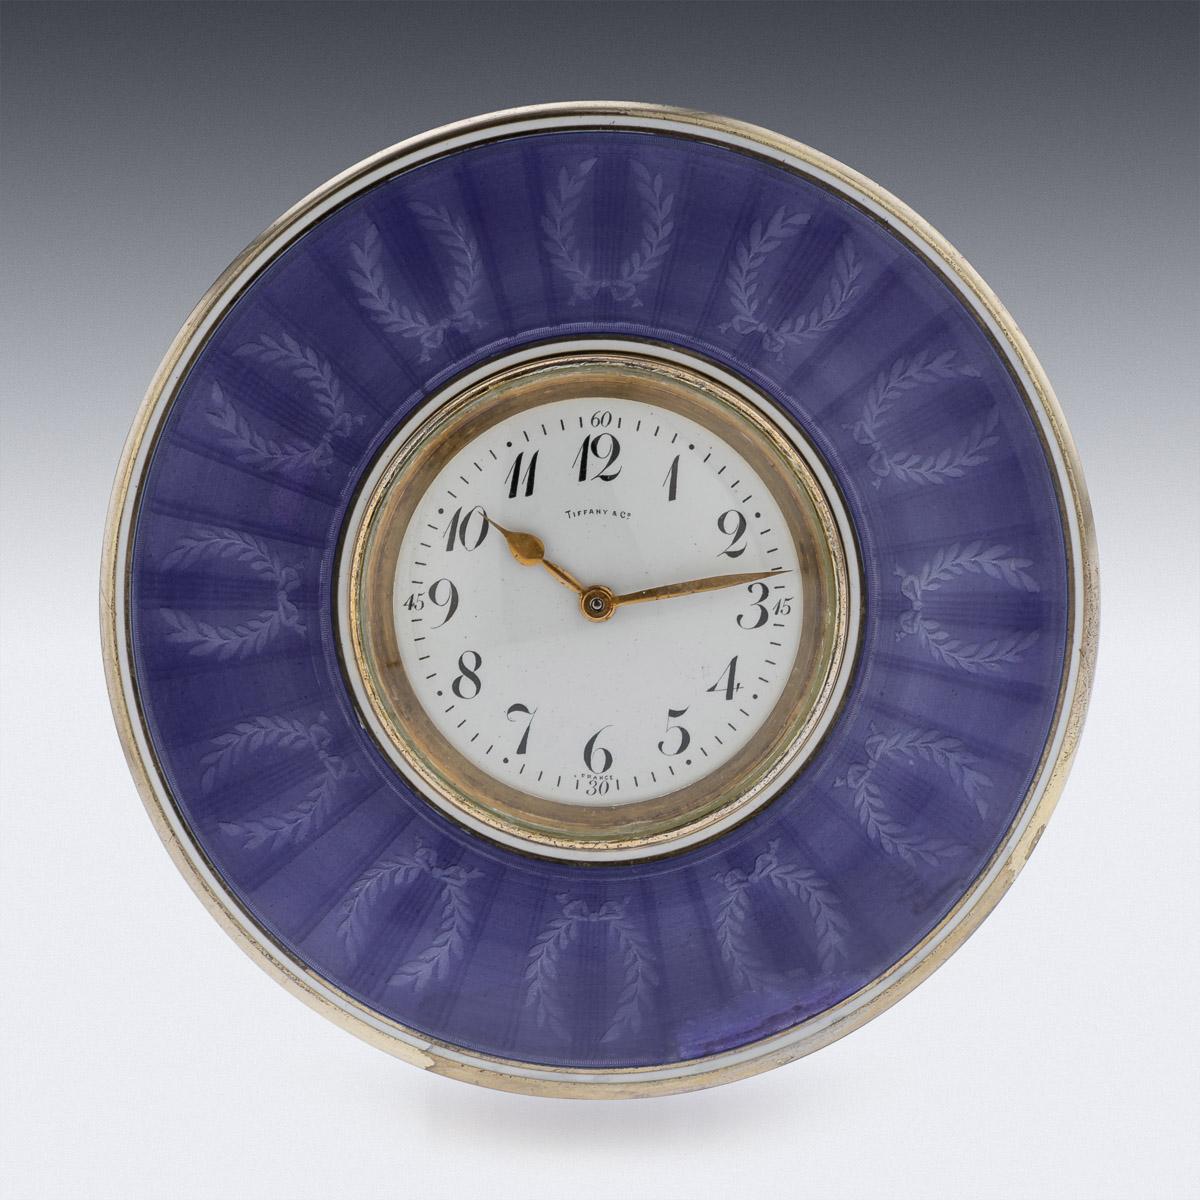 20th Century French silver & vibrant purple guilloche enamel table box with a clock. Richly silver-gilt and with an 8 day clock insert, with a white dial, numbers and subsidiary second dial. The clock in working condition. Hallmarked French silver